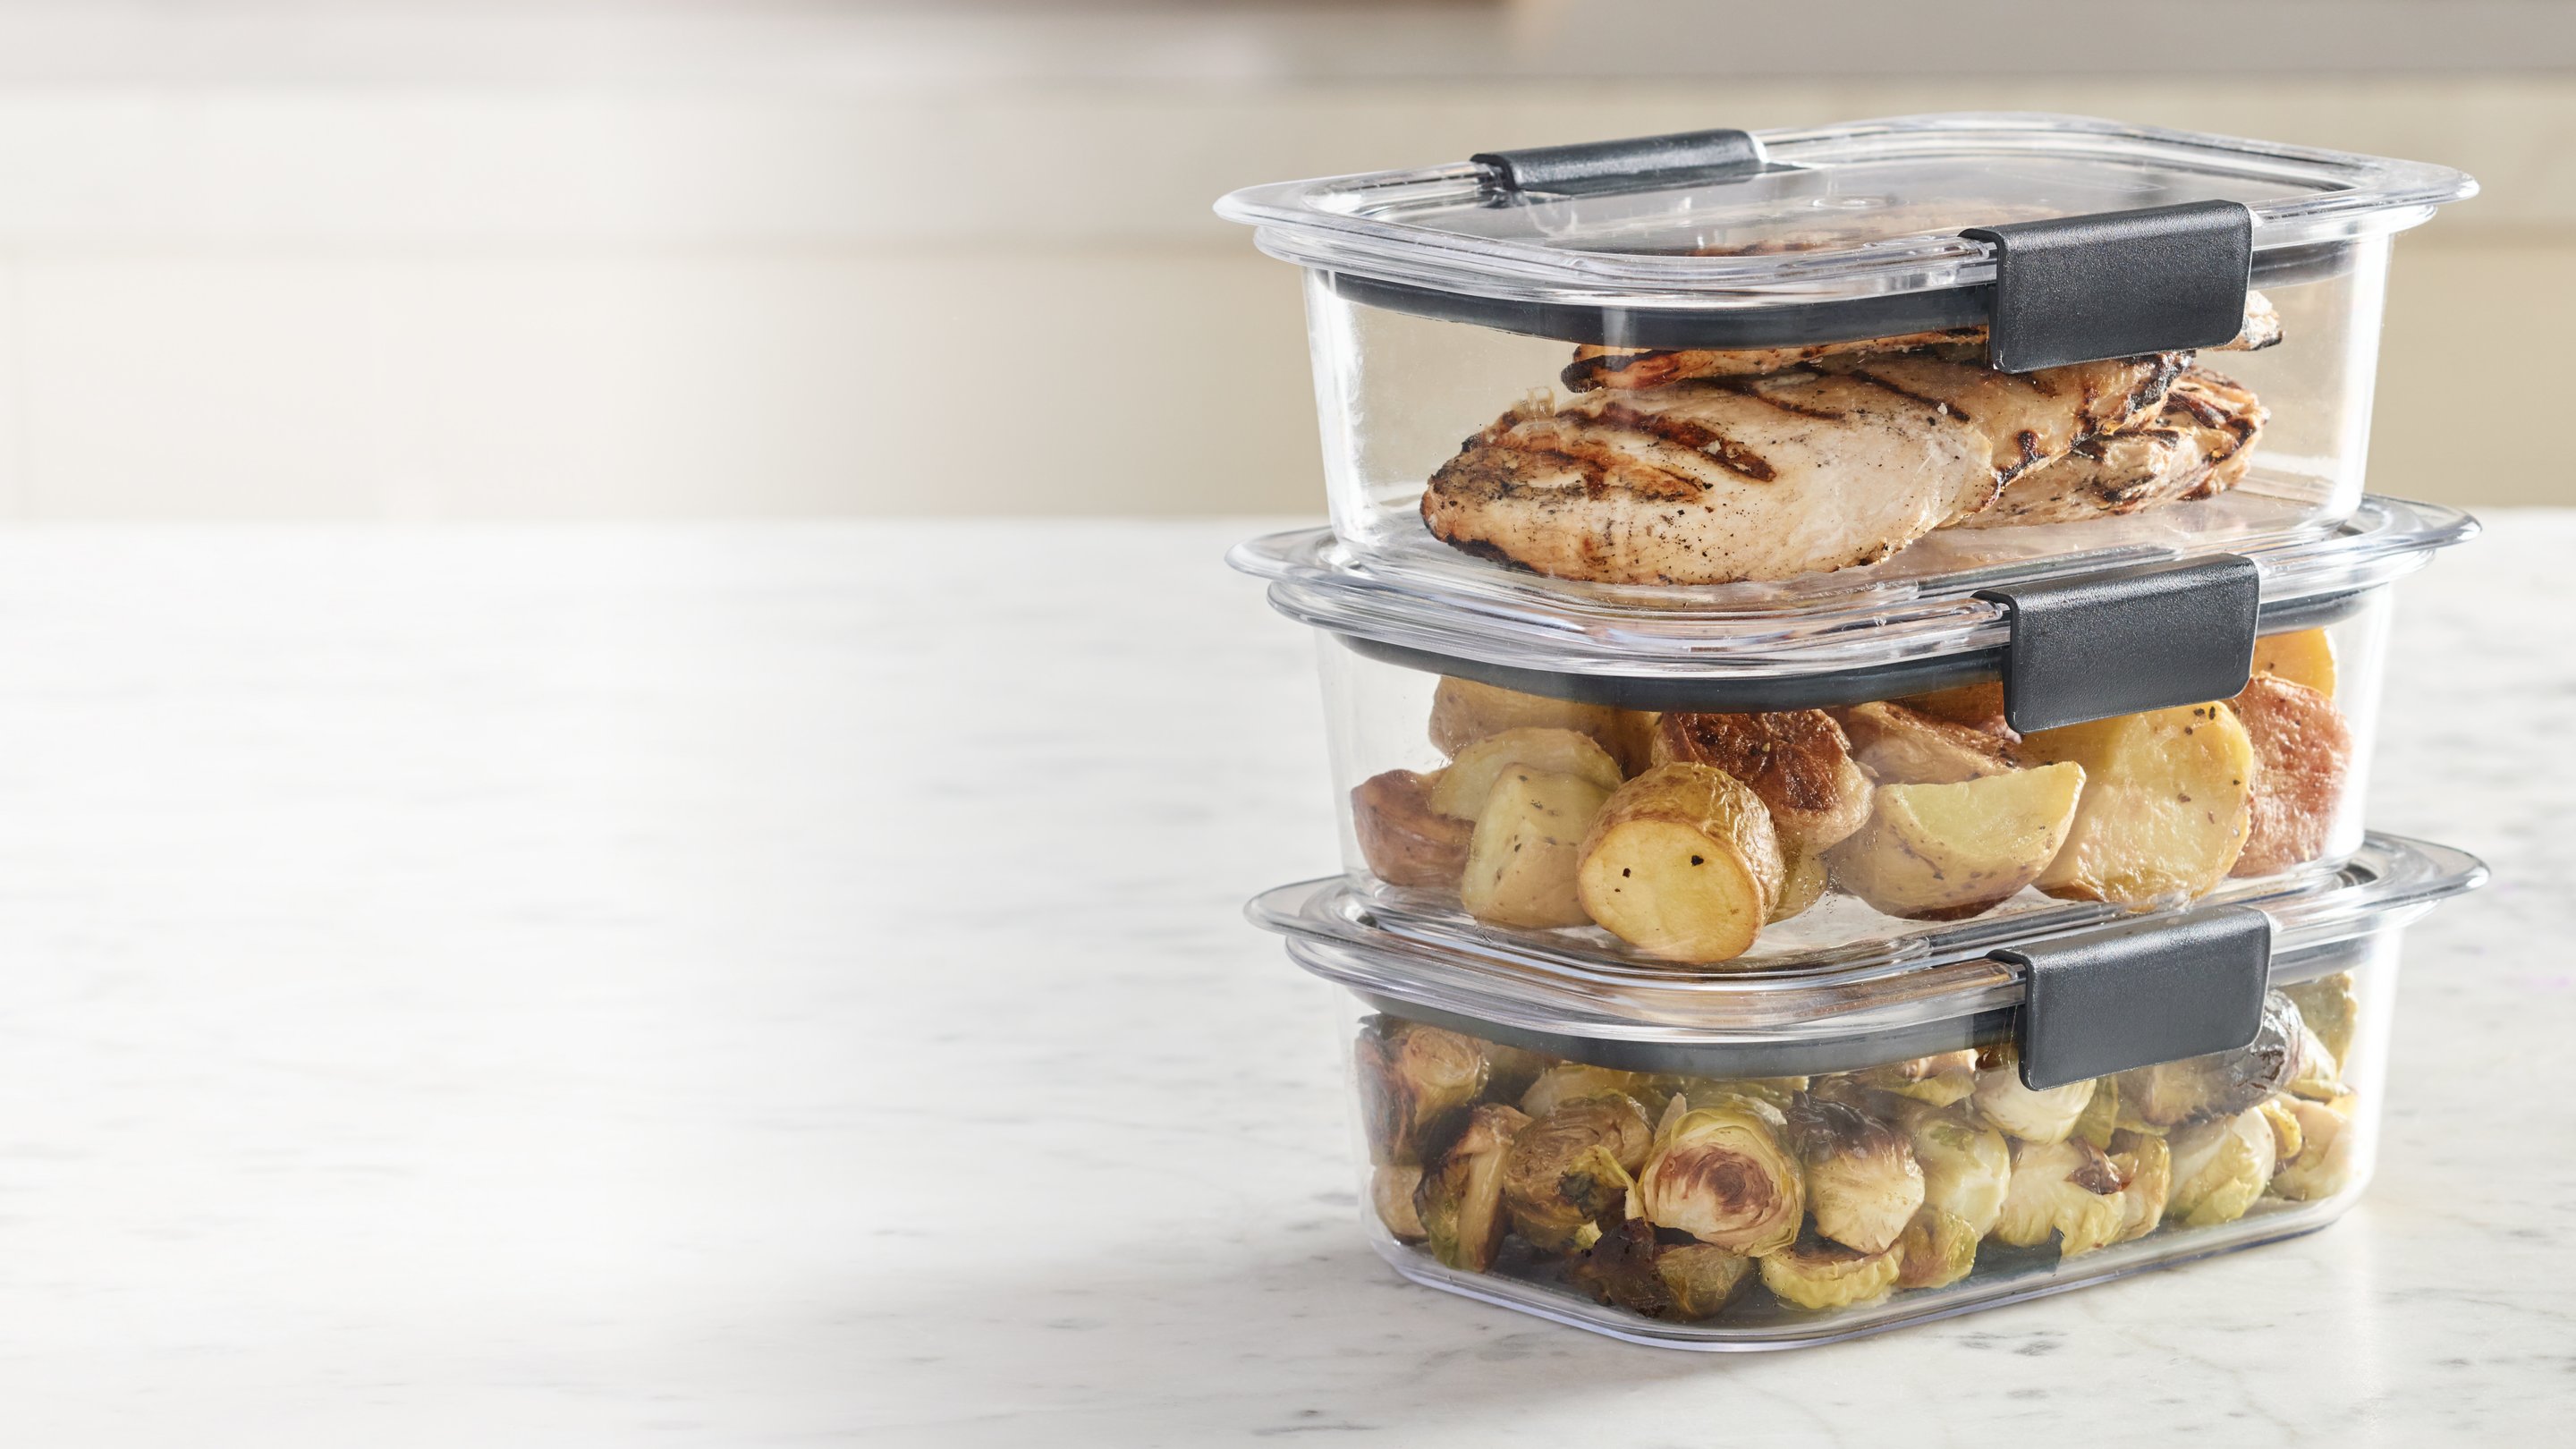 Rubbermaid brilliance food storage containers stacked